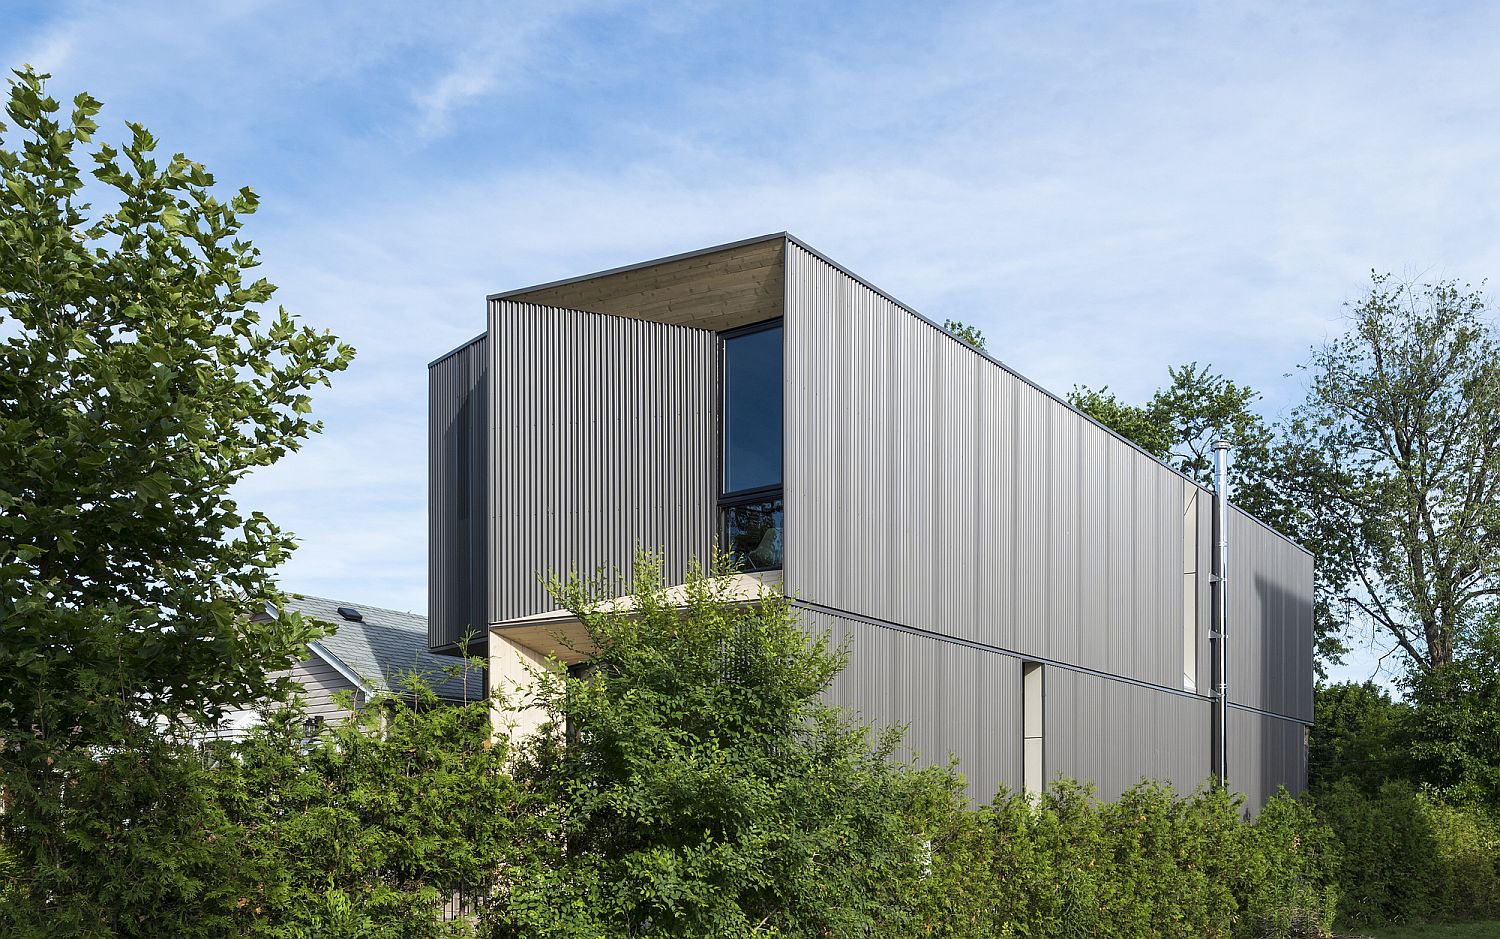 Dashing-contemporary-exterior-of-the-Tessaract-home-in-gray